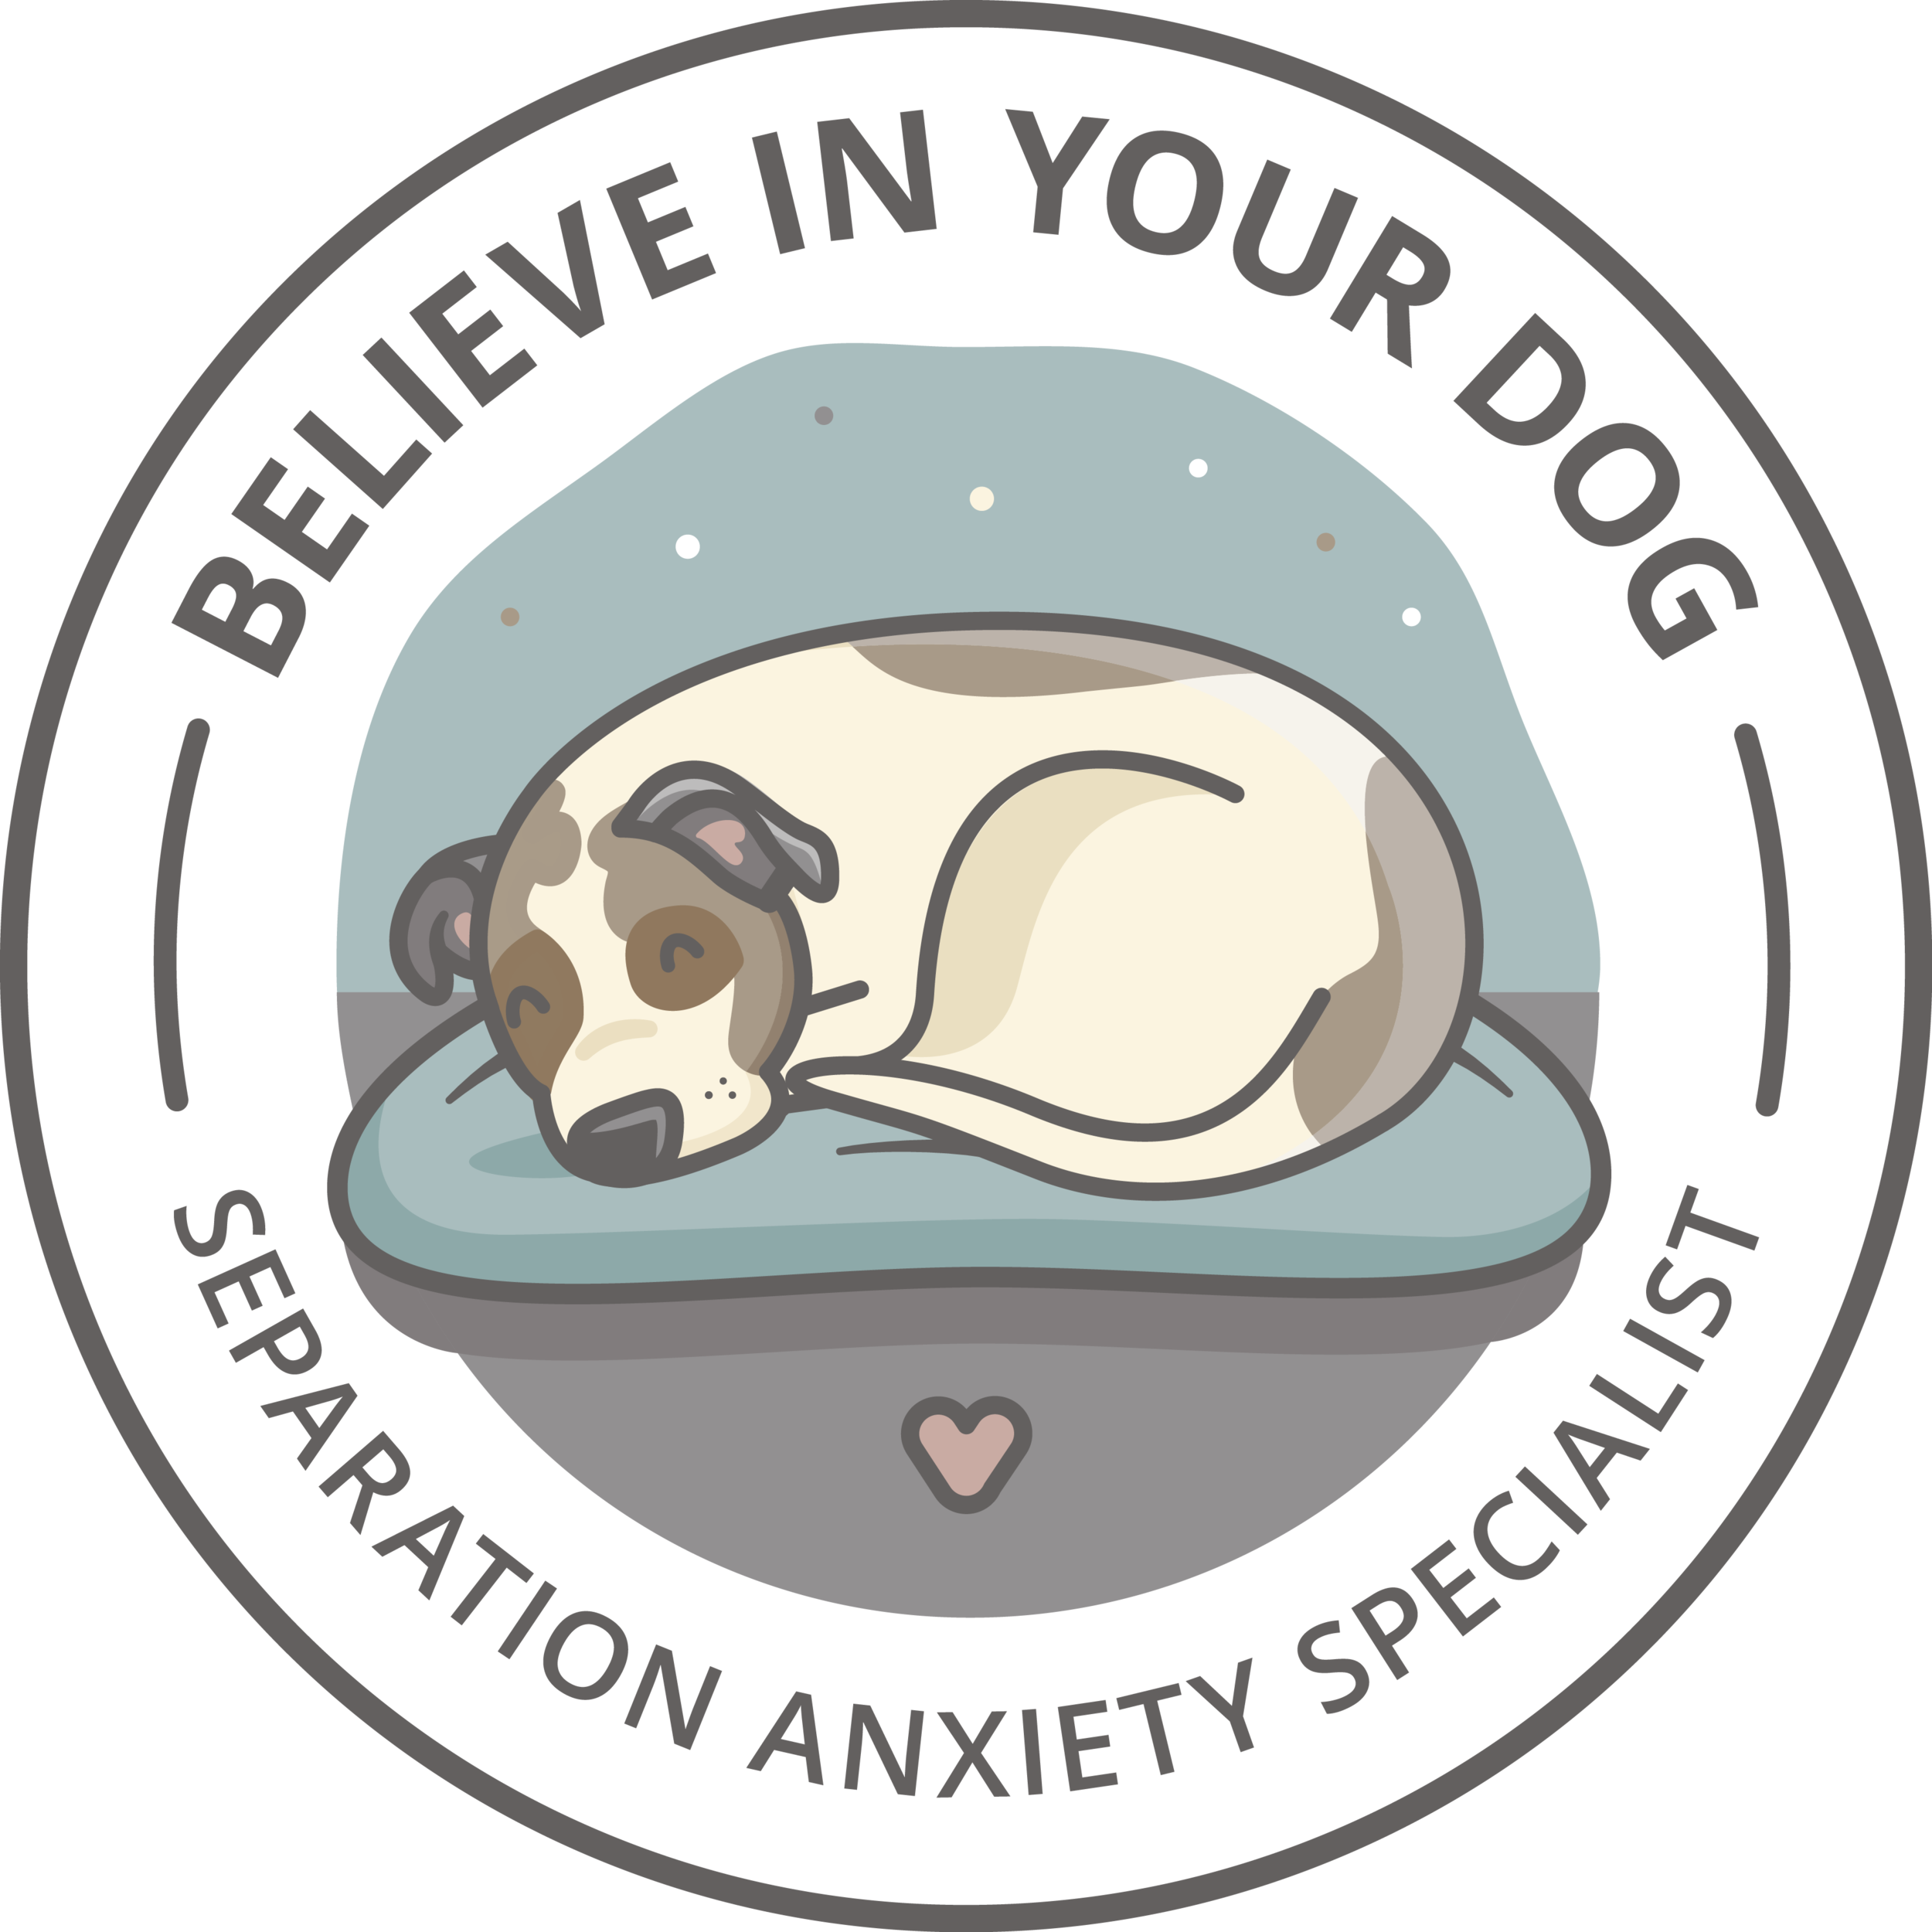 Believe in Your Dog - Specializing in Separation Anxiety in Dogs